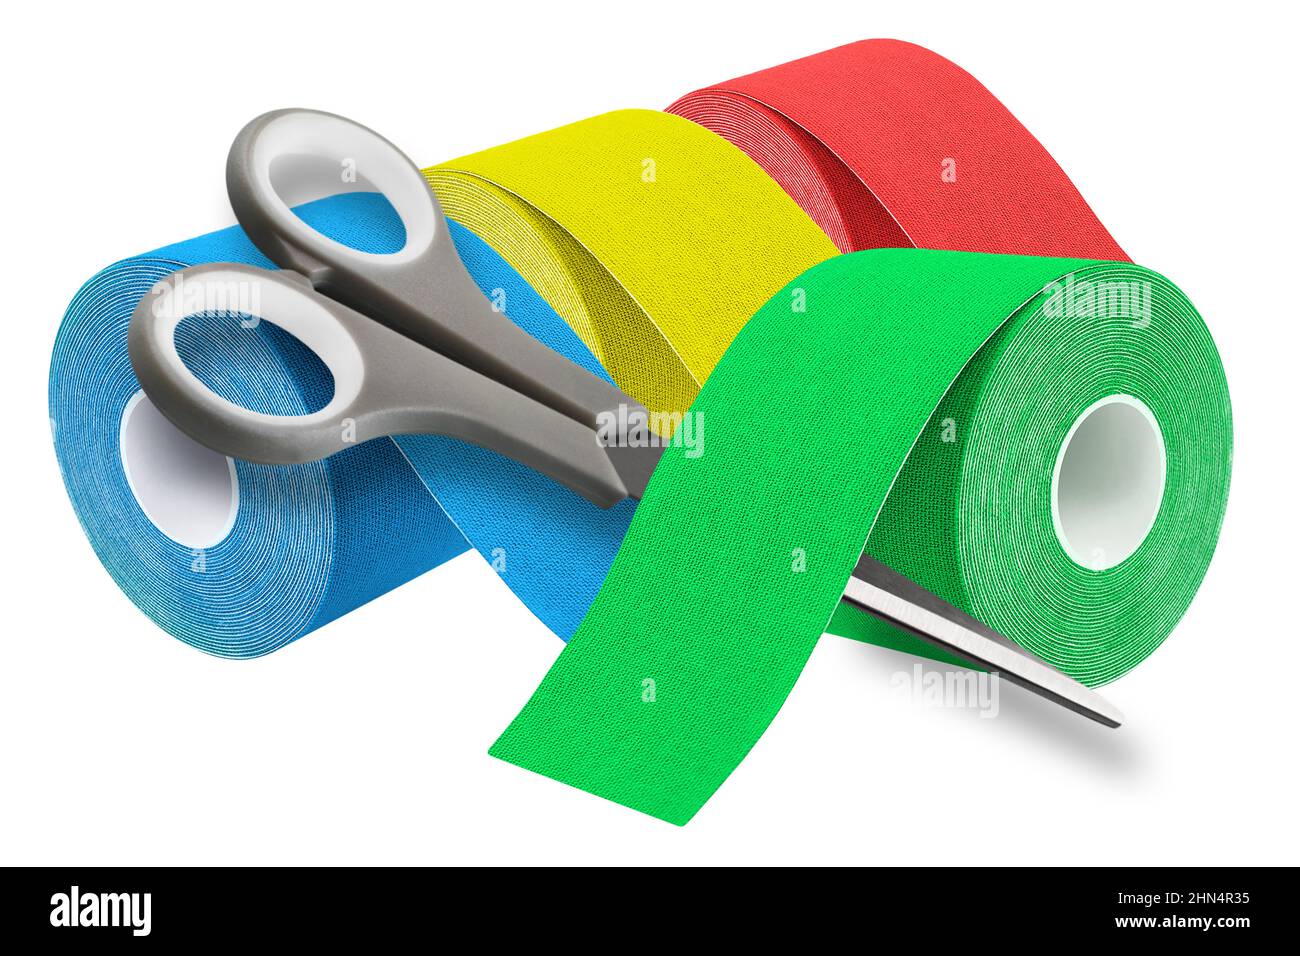 https://c8.alamy.com/comp/2HN4R35/various-kinesiology-tapes-and-scissors-isolated-against-white-background-closeup-2HN4R35.jpg